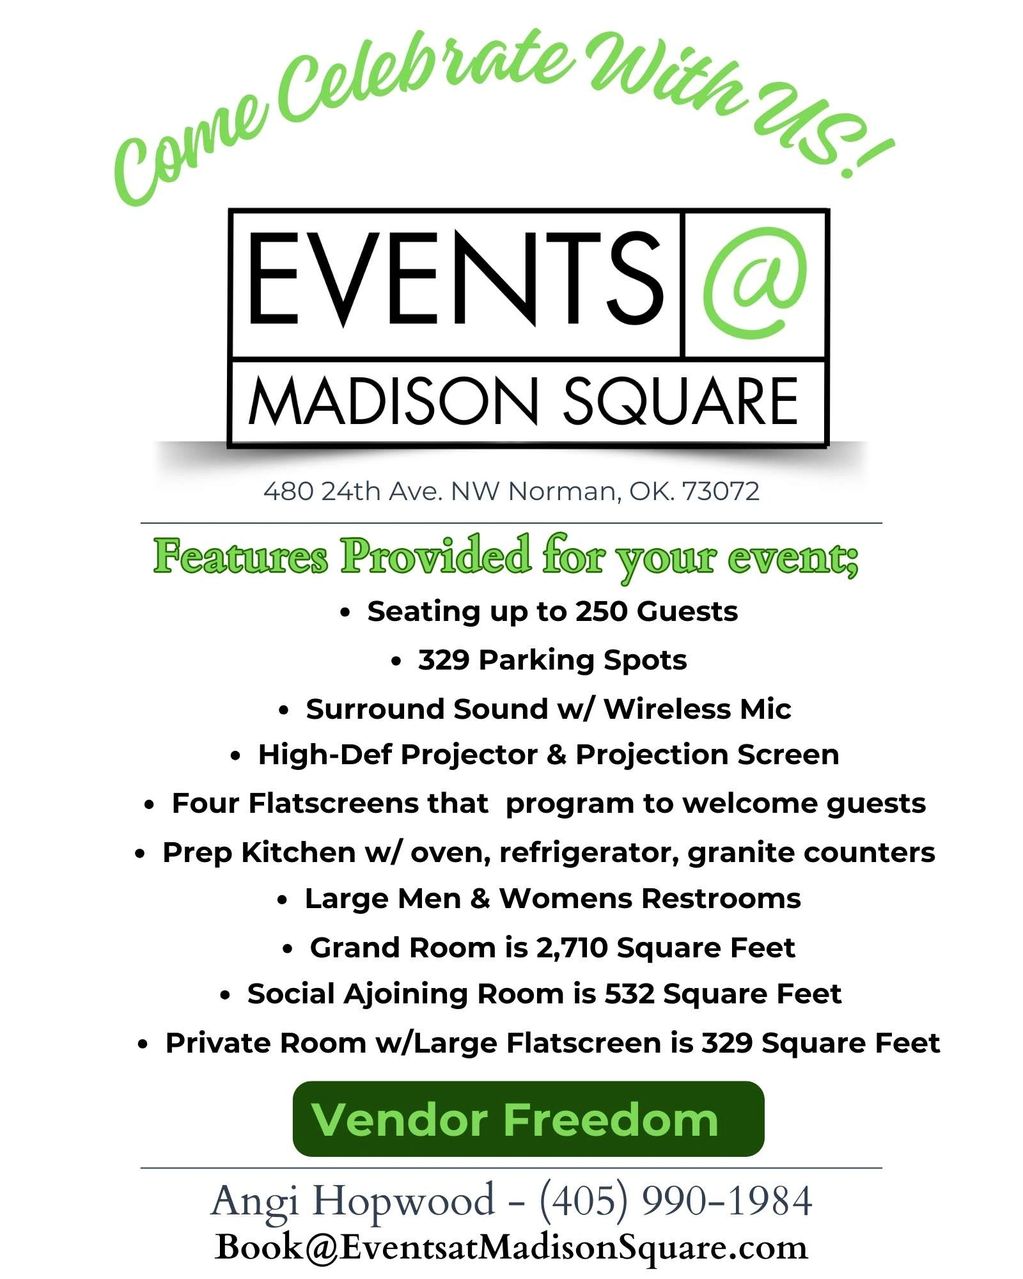 This is the layout of Events at Madison Square in Norman, Oklahoma and what is included when rented.